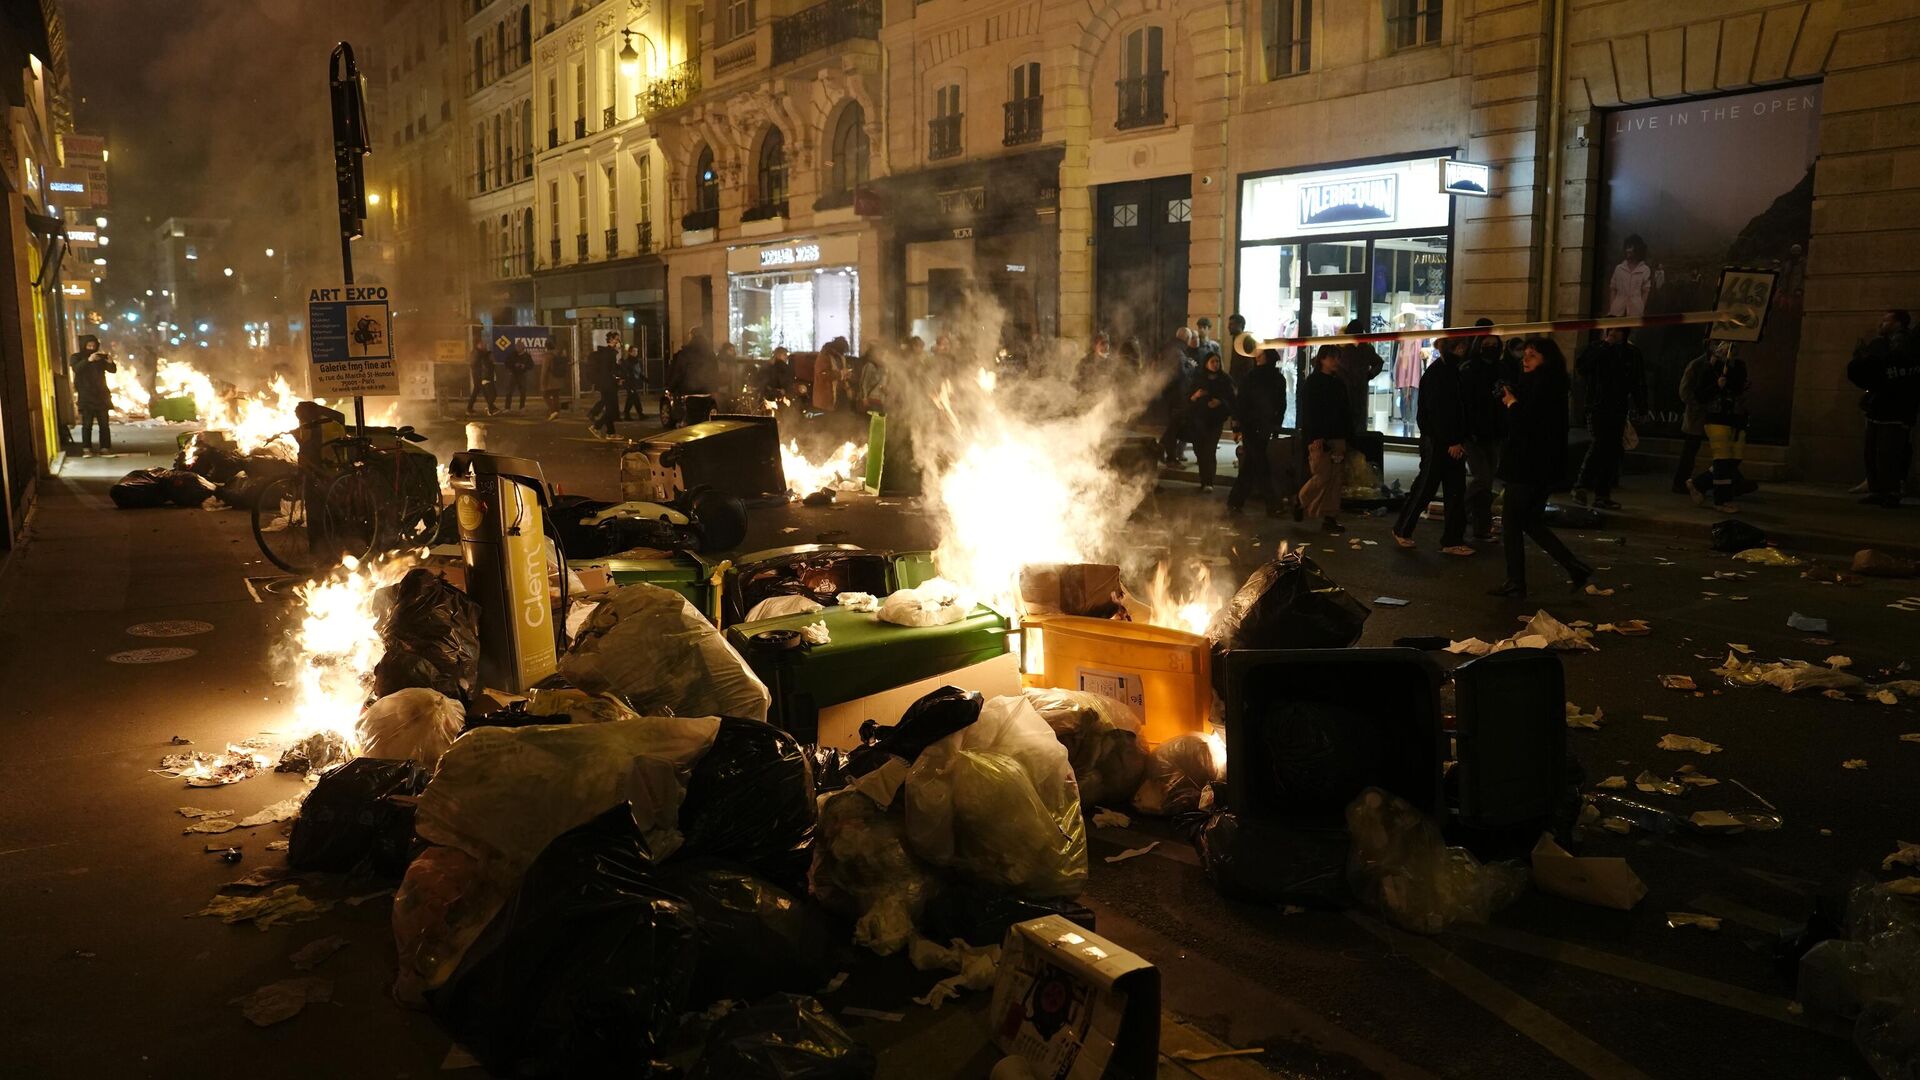 Garbage is set on fire by protesters after a demonstration near Concorde square, in Paris, Thursday, March 16, 2023. French President Emmanuel Macron has shunned parliament and imposed a highly unpopular change to the nation's pension system, raising the retirement age from 62 to 64. - Sputnik International, 1920, 28.03.2023